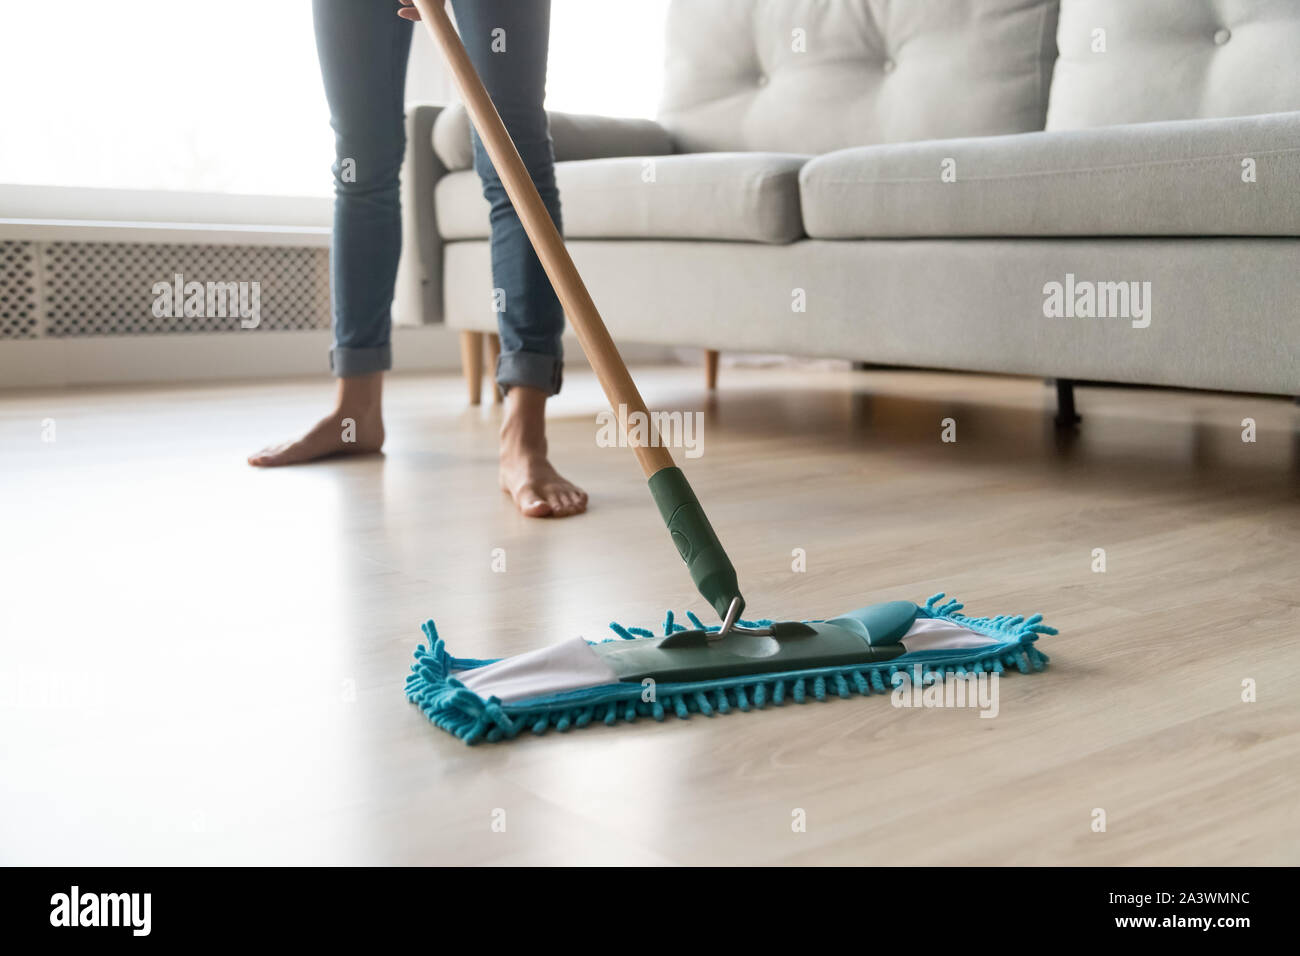 Woman housewife holding mop cleaning floor at home, close up Stock Photo